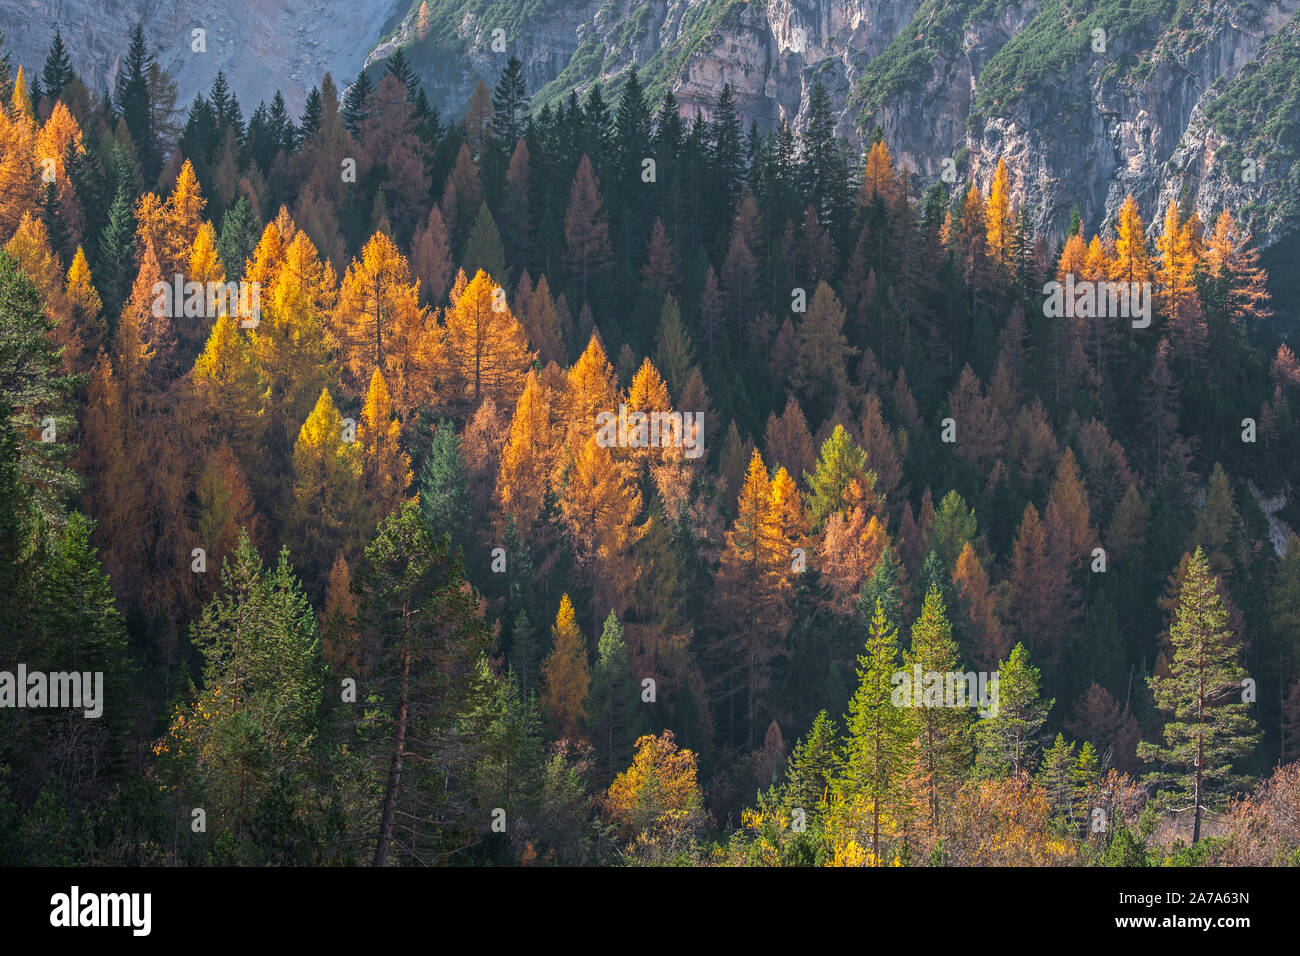 European larch trees (Larix decidua) and spruces in coniferous woodland on mountain slope showing autumn colours in the fall Stock Photo